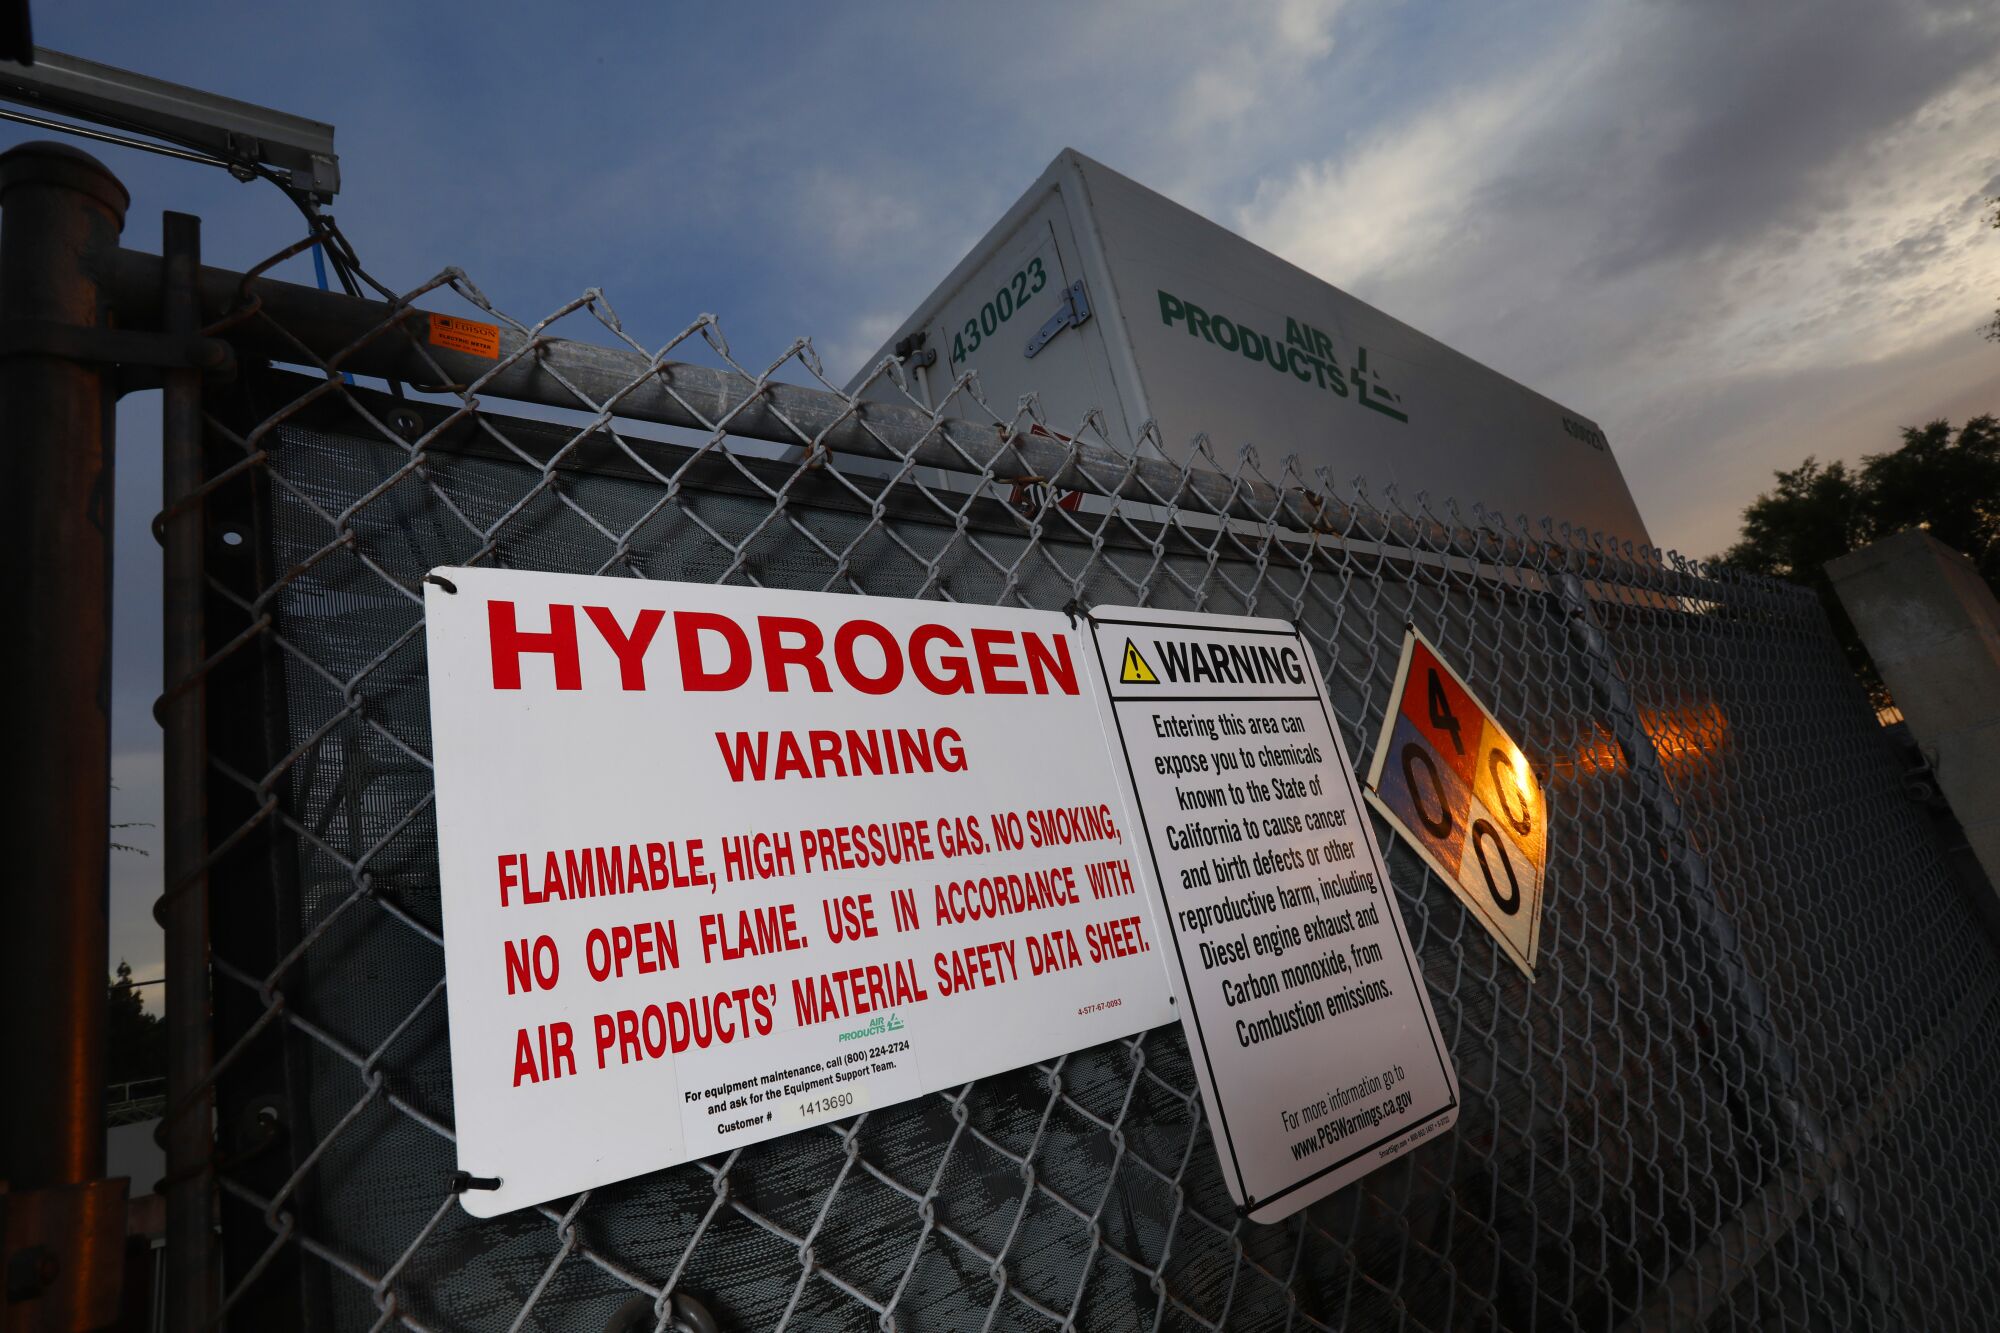 A sign reads "Hydrogen" with a "flammable" warning